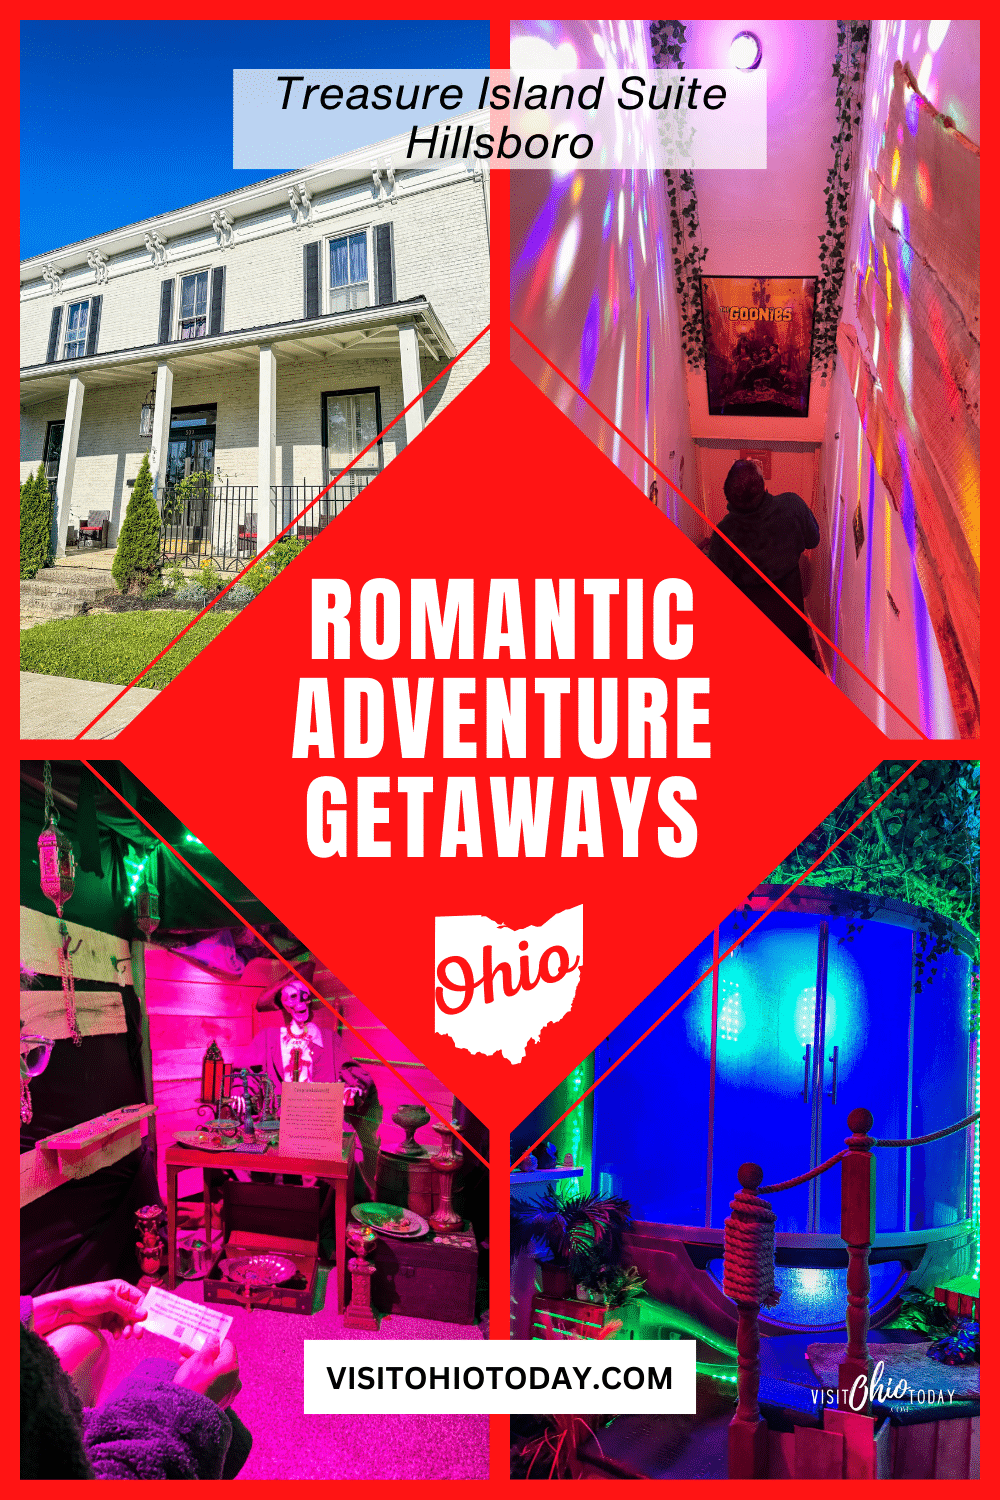 vertical image for Pinterest with four photos, one of the outside of the Hillsboro Romantic Adventure Getaways and three of the inside of the Treasure Island Suite. A red diamond shape in the center contains the text Romantic Adventure Getaways